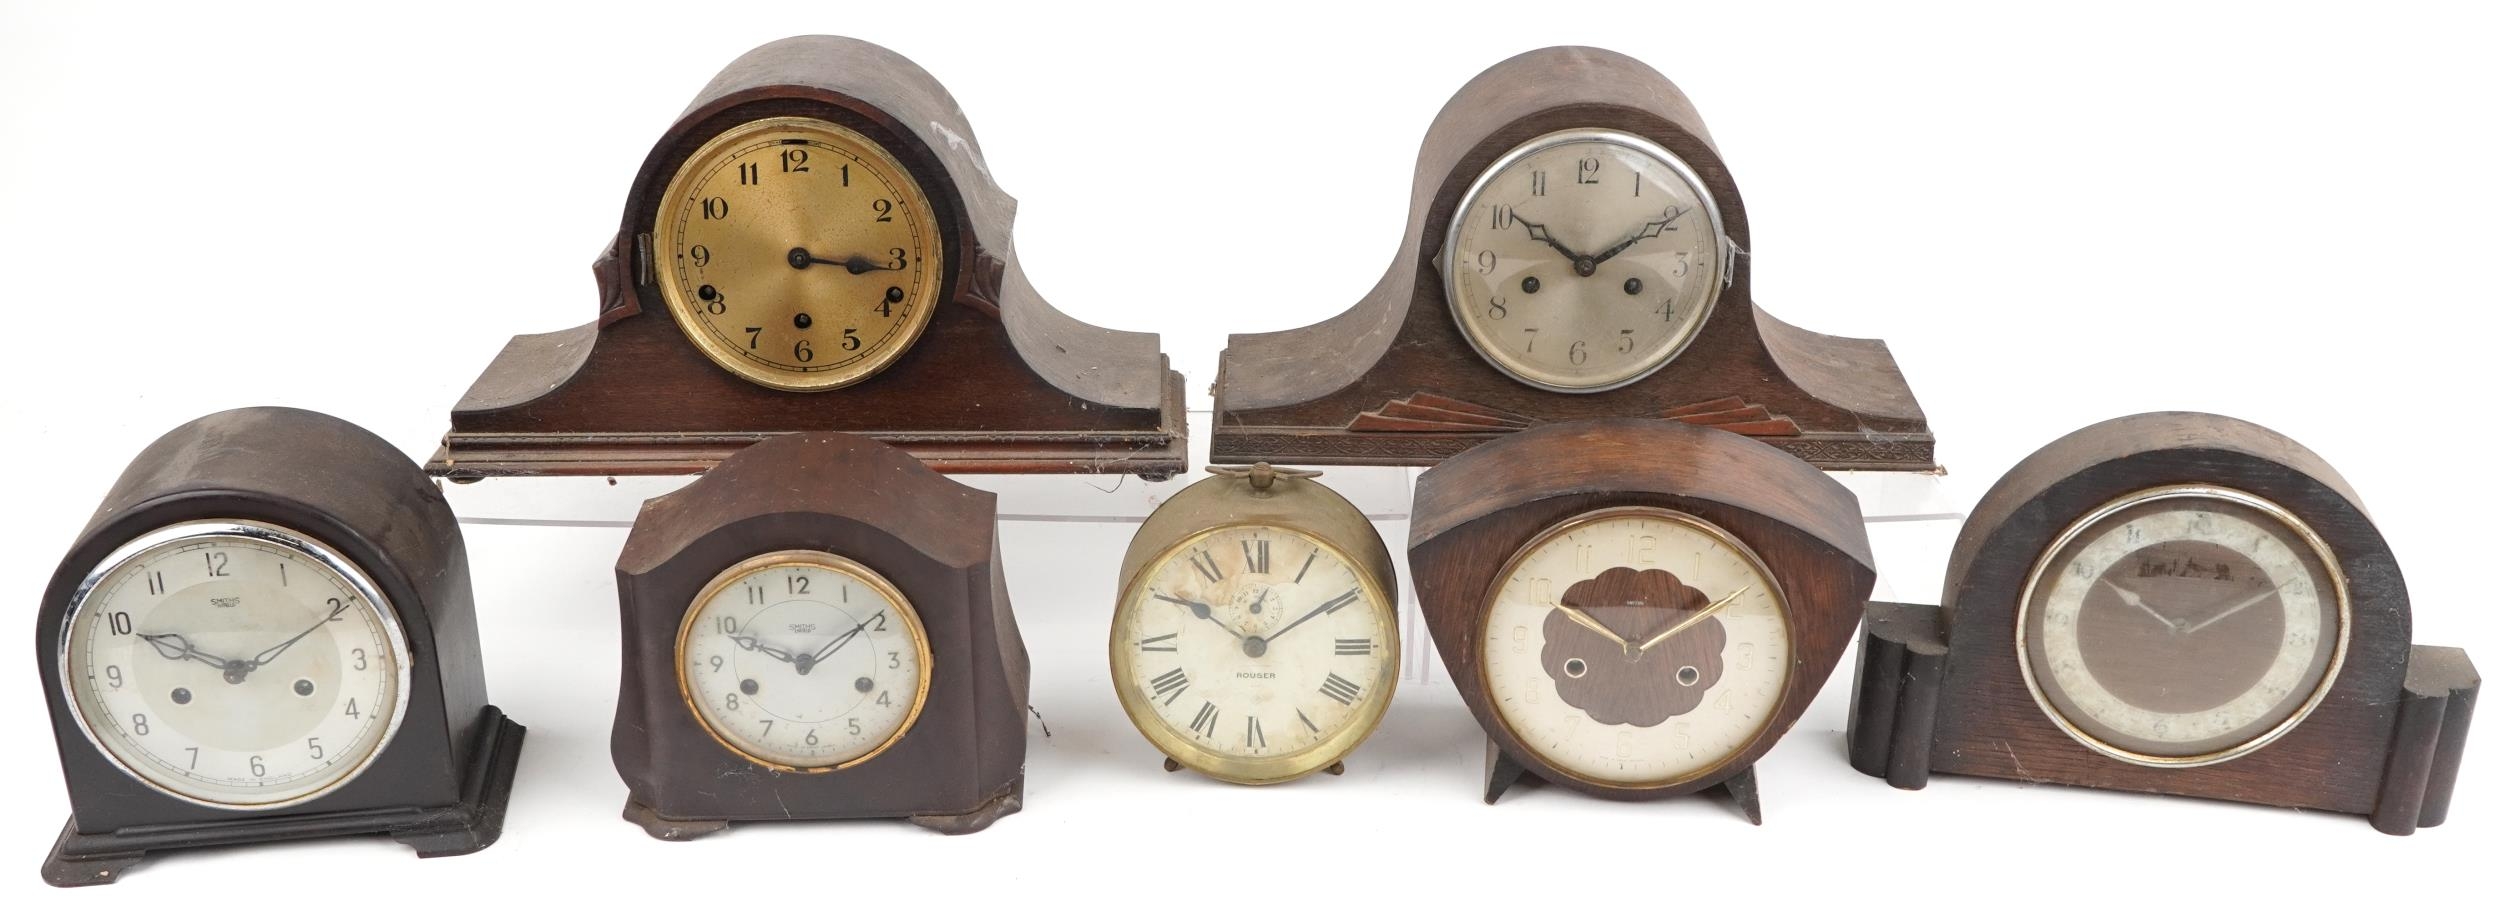 Six early 20th century oak and Bakelite mantle clocks and a American ship's design alarm example